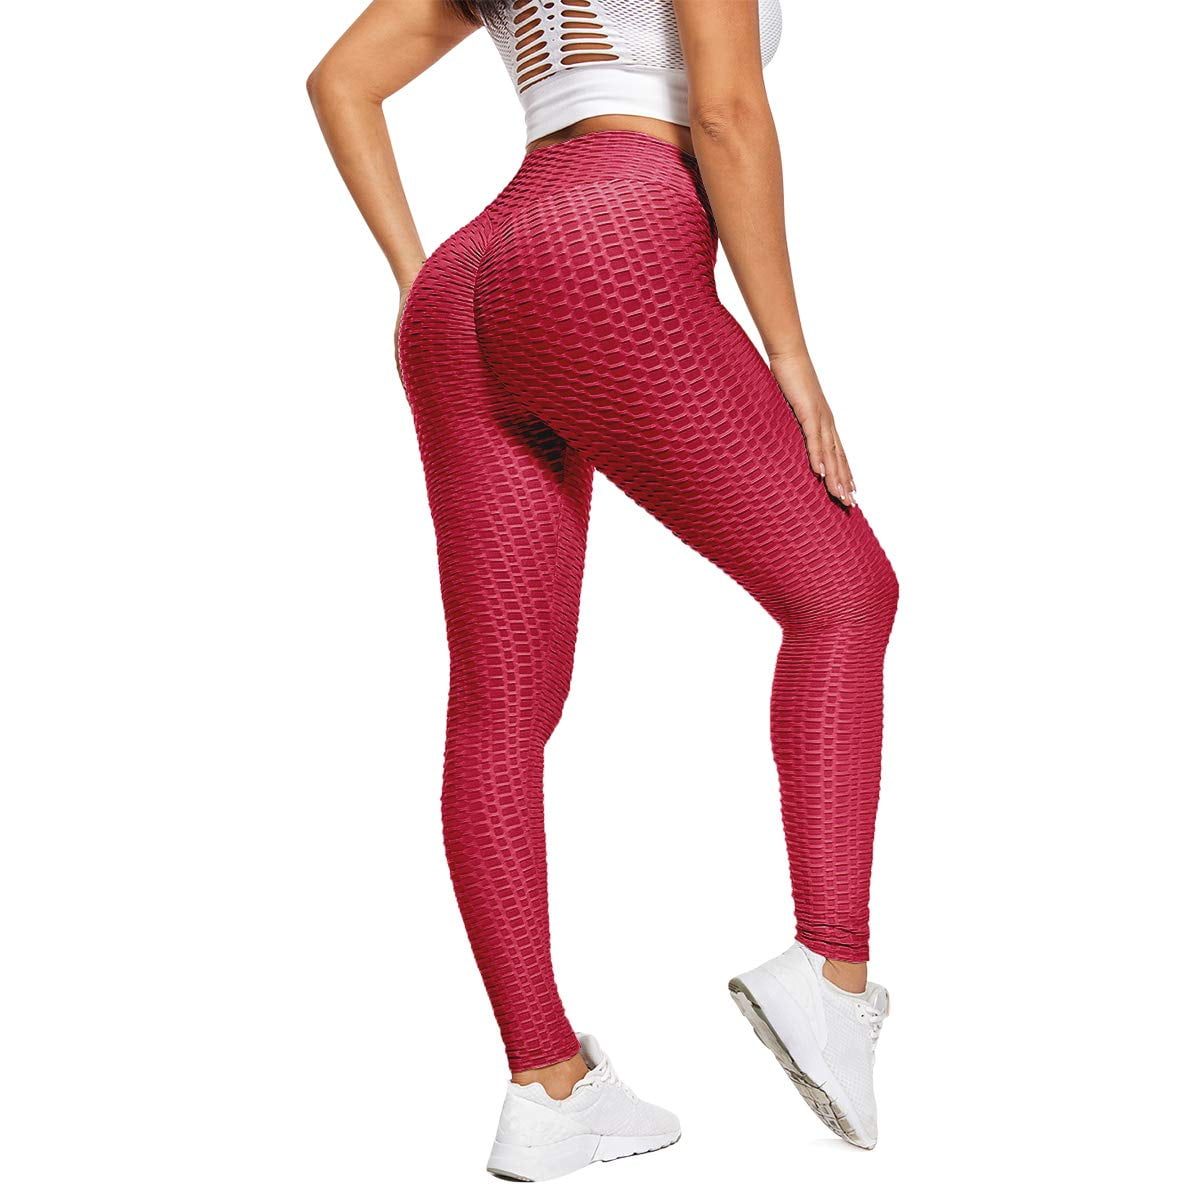 Women's High Waist Yoga Pants Tummy Control Slimming Booty Leggings Workout  Running Butt Lift Tights,Anti Cellulite Ruched Butt Lifting Leggings 